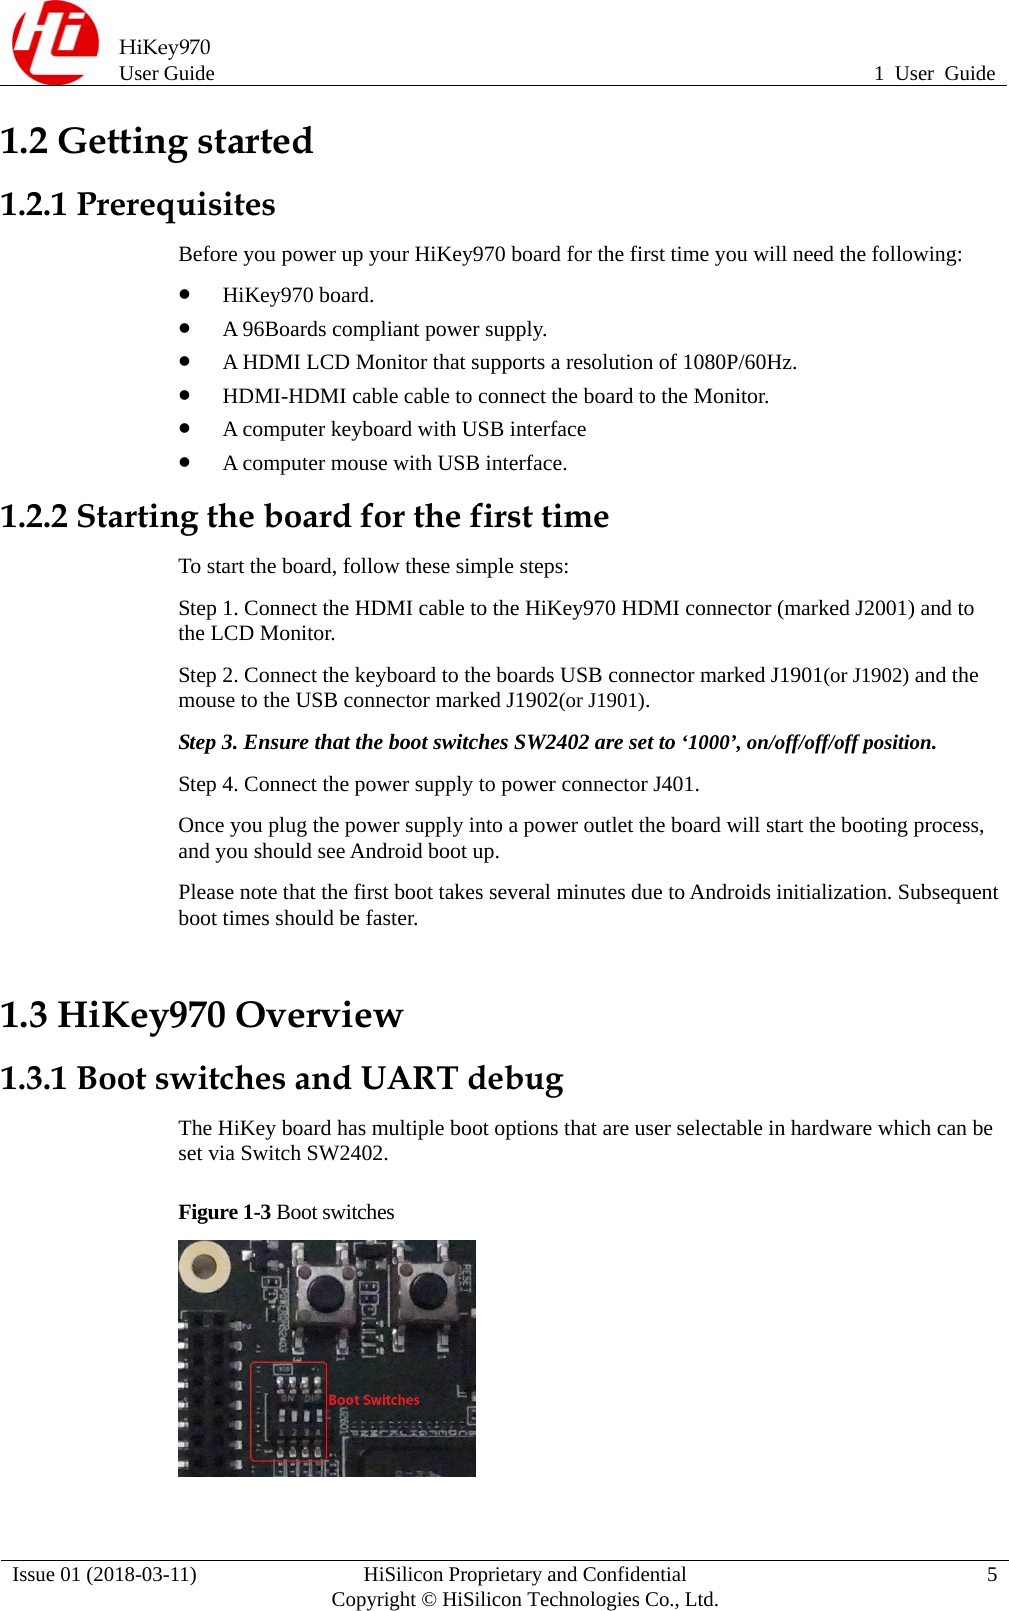  HiKey970 User Guide  1 User Guide Issue 01 (2018-03-11)  HiSilicon Proprietary and Confidential          Copyright © HiSilicon Technologies Co., Ltd.  5 1.2 Getting started 1.2.1 Prerequisites   Before you power up your HiKey970 board for the first time you will need the following:    HiKey970 board.    A 96Boards compliant power supply.    A HDMI LCD Monitor that supports a resolution of 1080P/60Hz.    HDMI-HDMI cable cable to connect the board to the Monitor.    A computer keyboard with USB interface    A computer mouse with USB interface.   1.2.2 Starting the board for the first time   To start the board, follow these simple steps:   Step 1. Connect the HDMI cable to the HiKey970 HDMI connector (marked J2001) and to the LCD Monitor.   Step 2. Connect the keyboard to the boards USB connector marked J1901(or J1902) and the mouse to the USB connector marked J1902(or J1901). Step 3. Ensure that the boot switches SW2402 are set to ‘1000’, on/off/off/off position.   Step 4. Connect the power supply to power connector J401.   Once you plug the power supply into a power outlet the board will start the booting process, and you should see Android boot up.   Please note that the first boot takes several minutes due to Androids initialization. Subsequent boot times should be faster.1.3 HiKey970 Overview 1.3.1 Boot switches and UART debug The HiKey board has multiple boot options that are user selectable in hardware which can be set via Switch SW2402. Figure 1-3 Boot switches